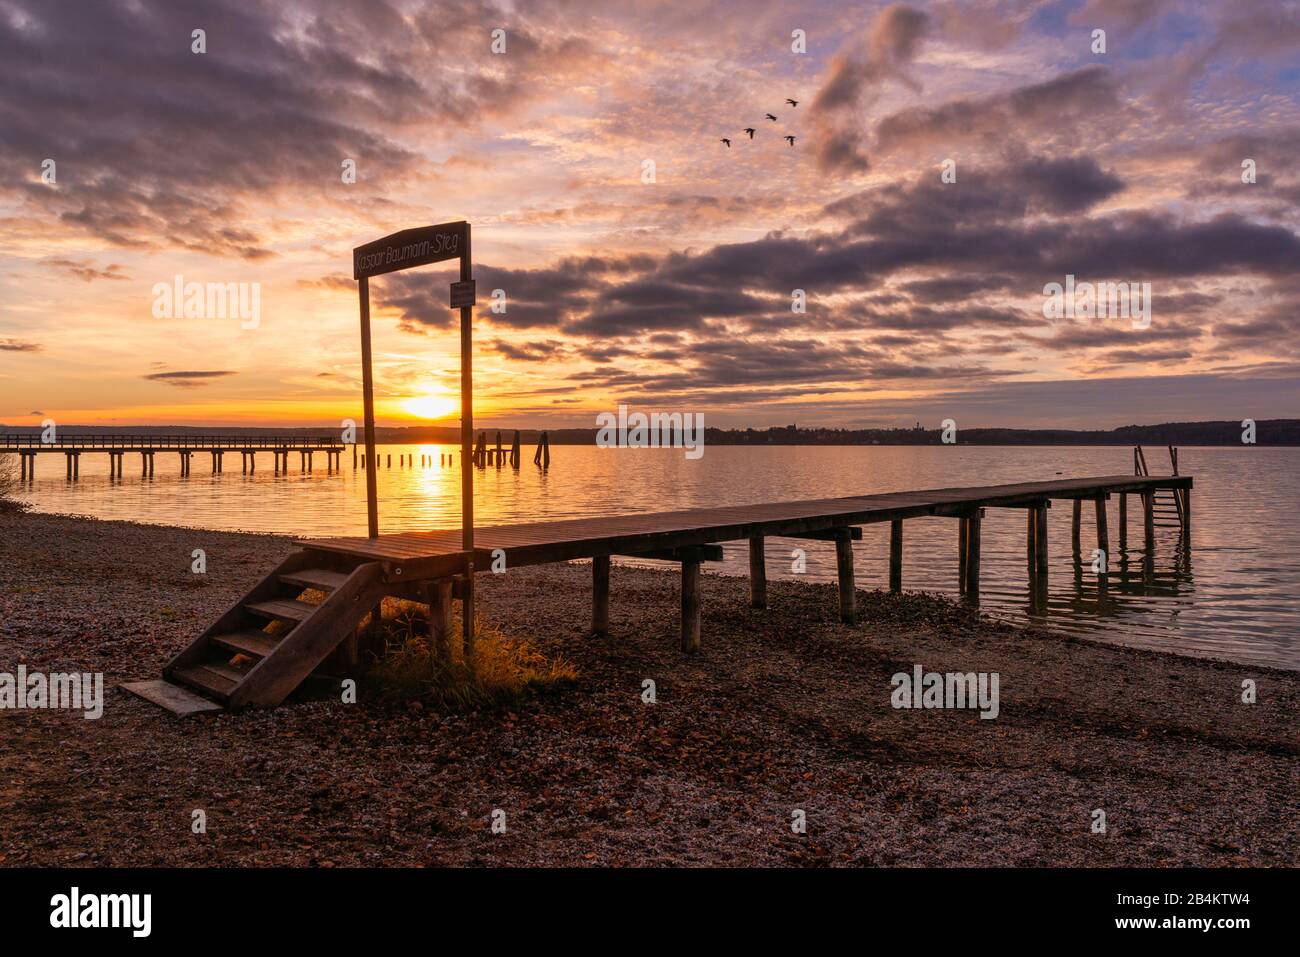 Inning community, Buch am Ammersee, beach, sunset with gate Stock Photo